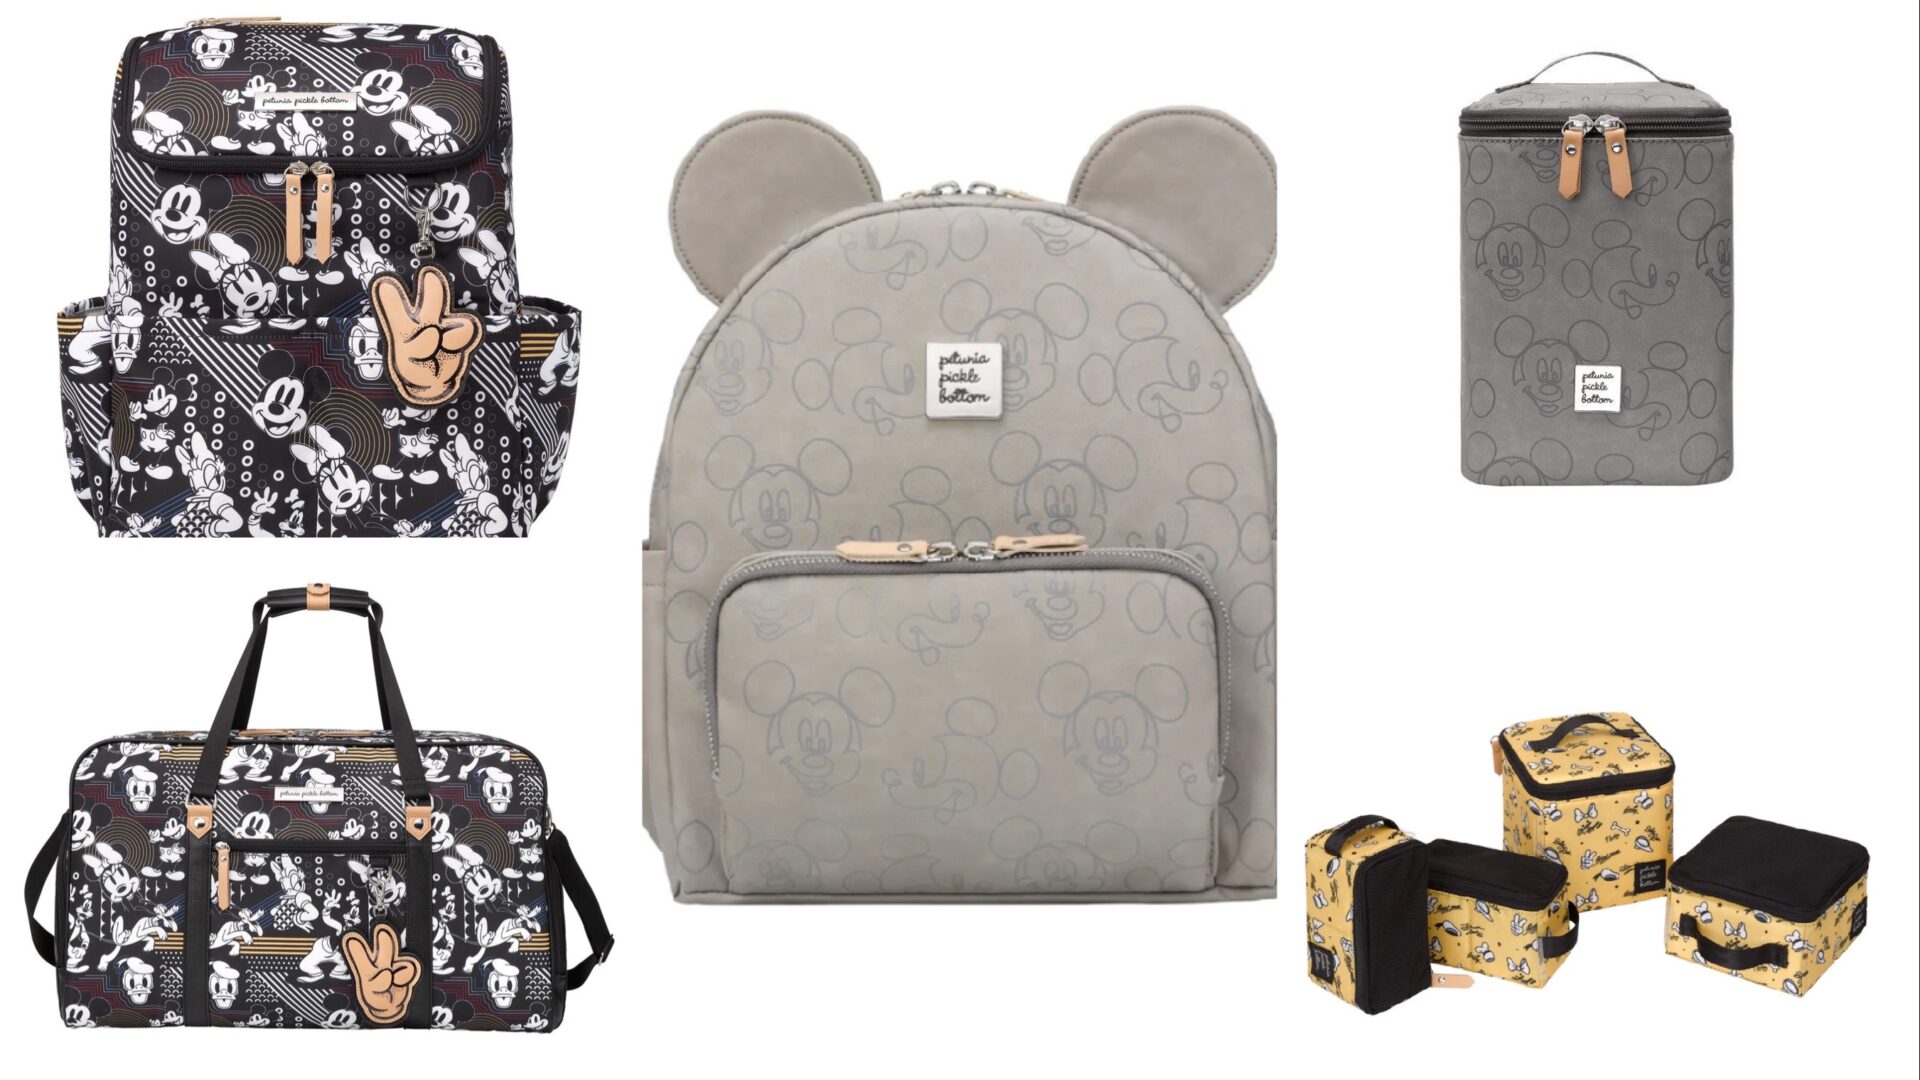 New Disney100 Petunia Pickle Bottom Collection Celebrates 100 Years Of Wonder!